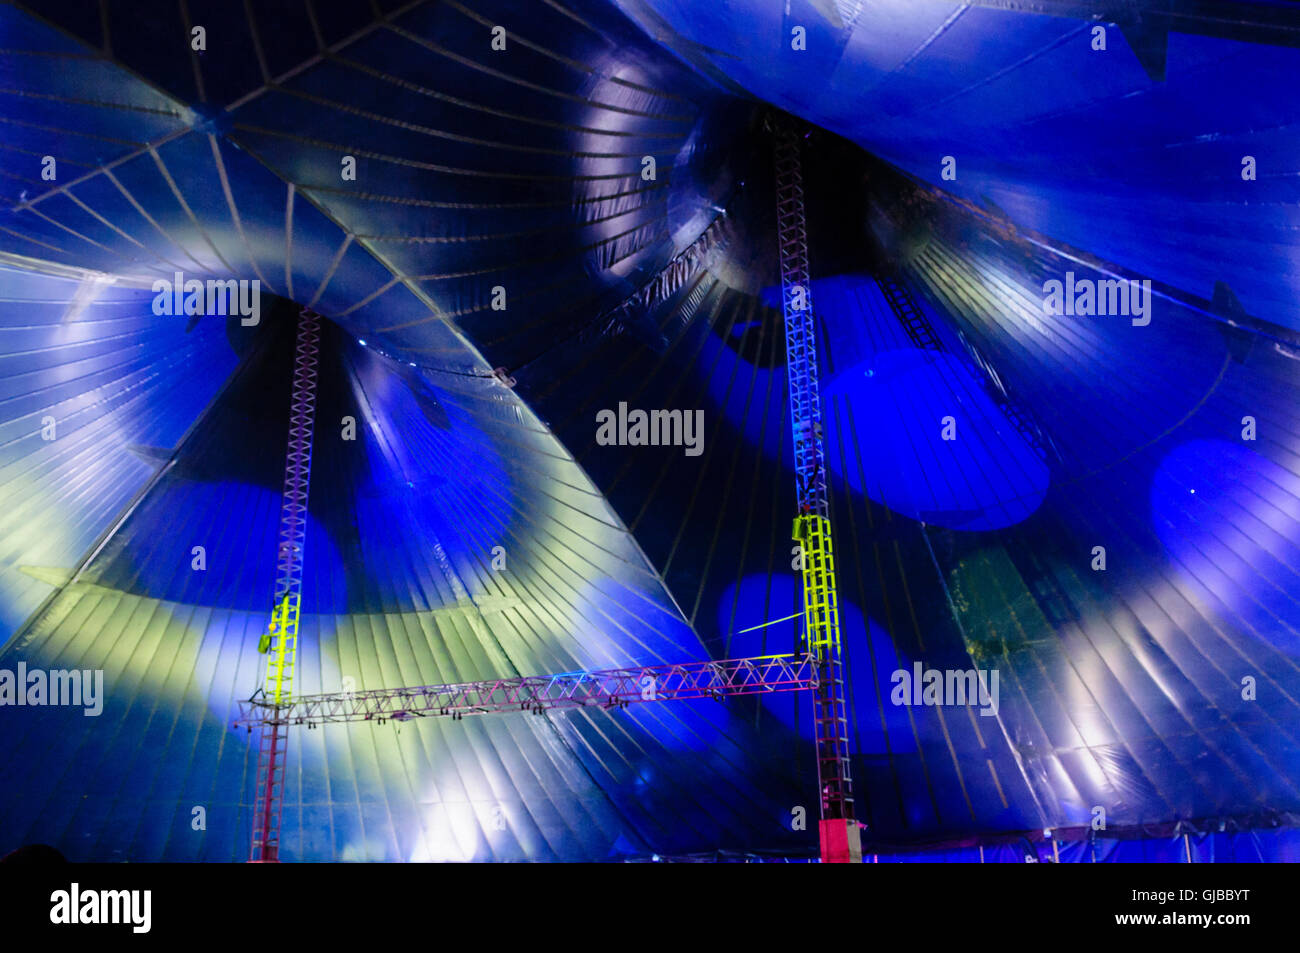 Steel towers holding up the vaults of a circus big tent. Stock Photo